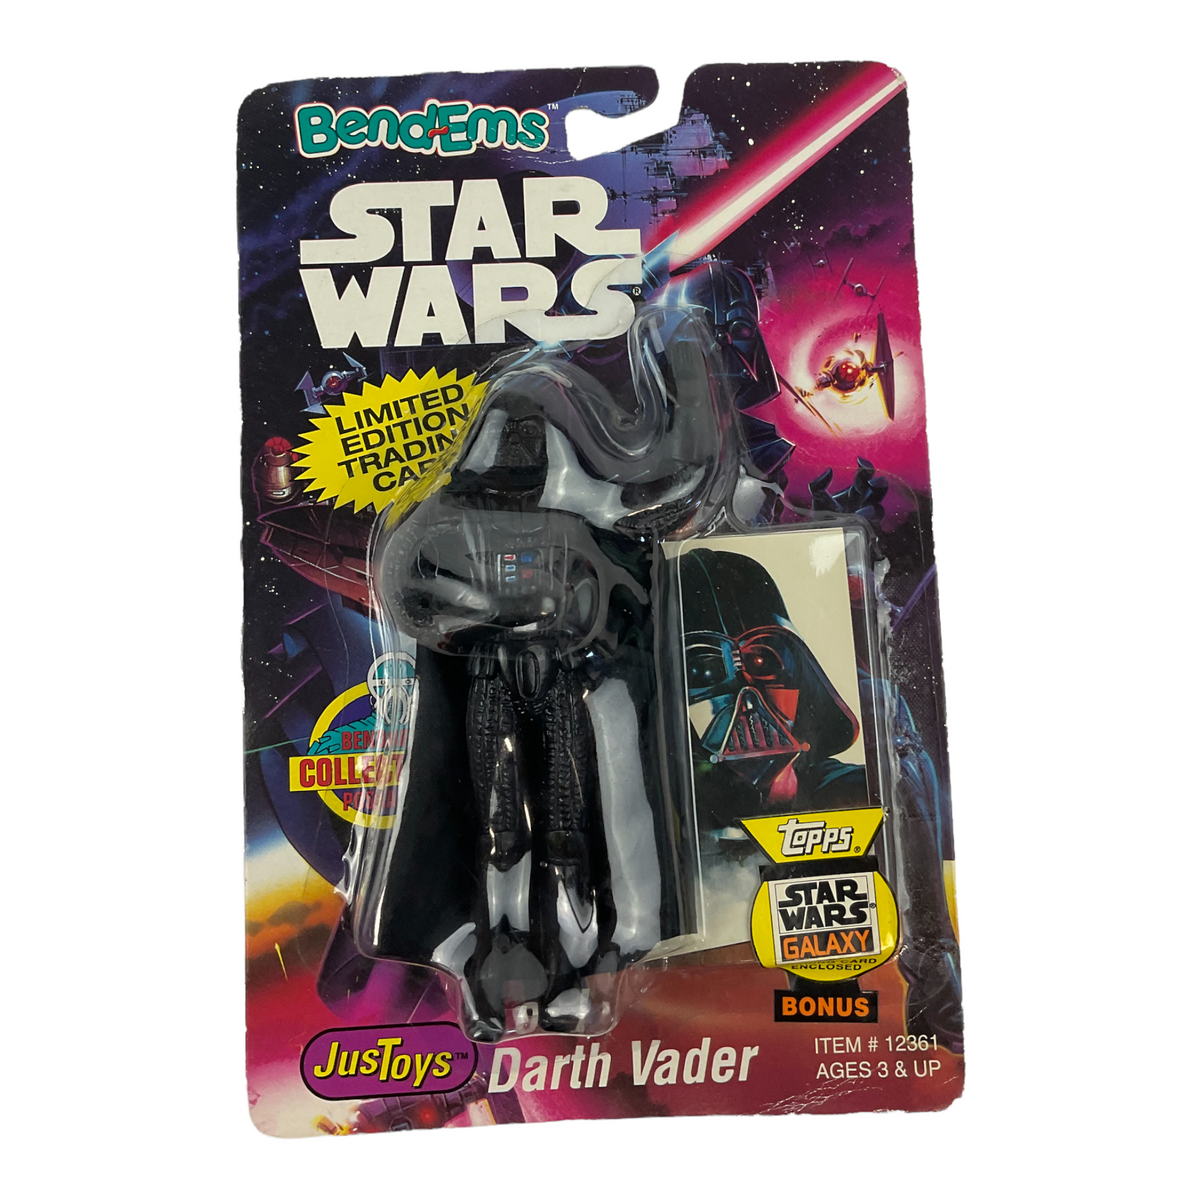 Star Wars Bend-Ems Darth Vader Figure with Limited Edition Trading Card